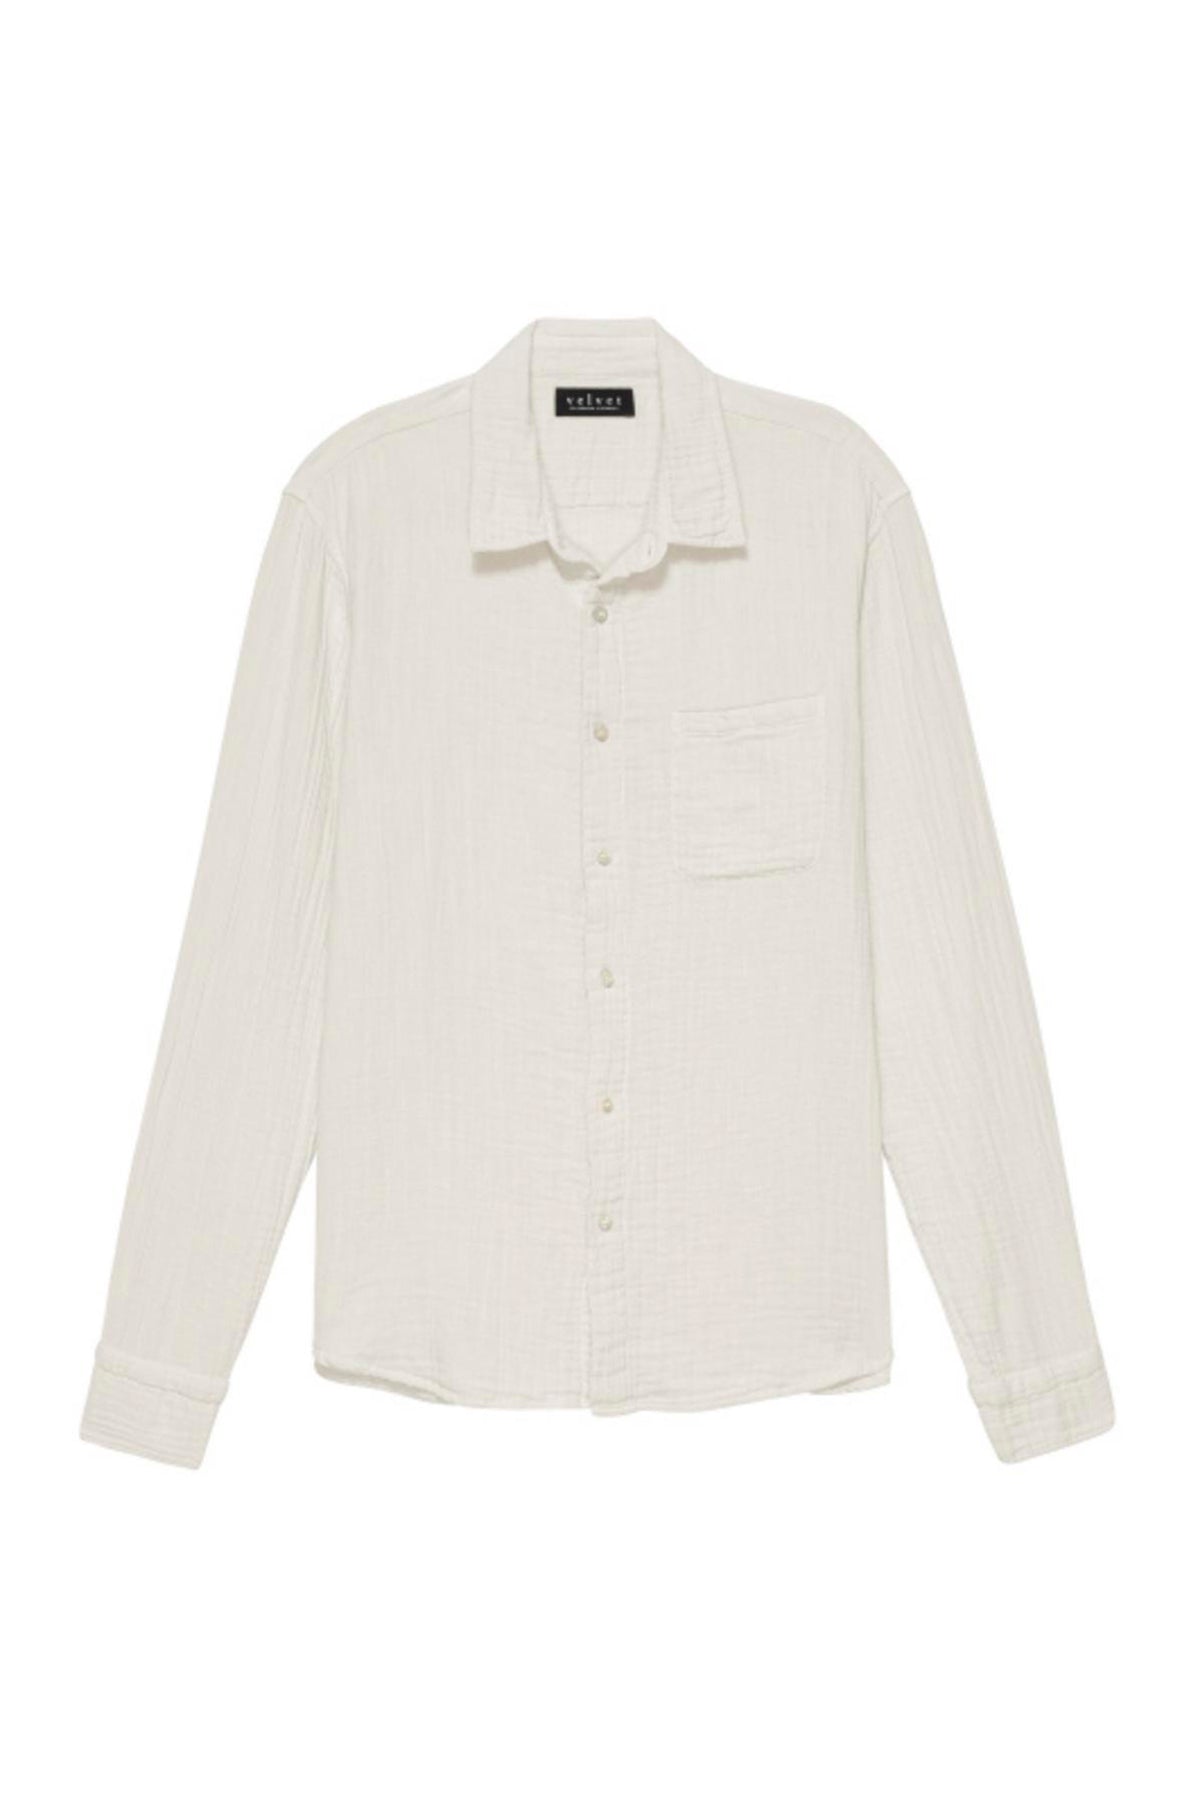 A plain white, long-sleeved Velvet by Graham & Spencer ELTON COTTON GAUZE BUTTON-UP SHIRT with a collar and double button cuff, displayed against a white background.-36805210669249